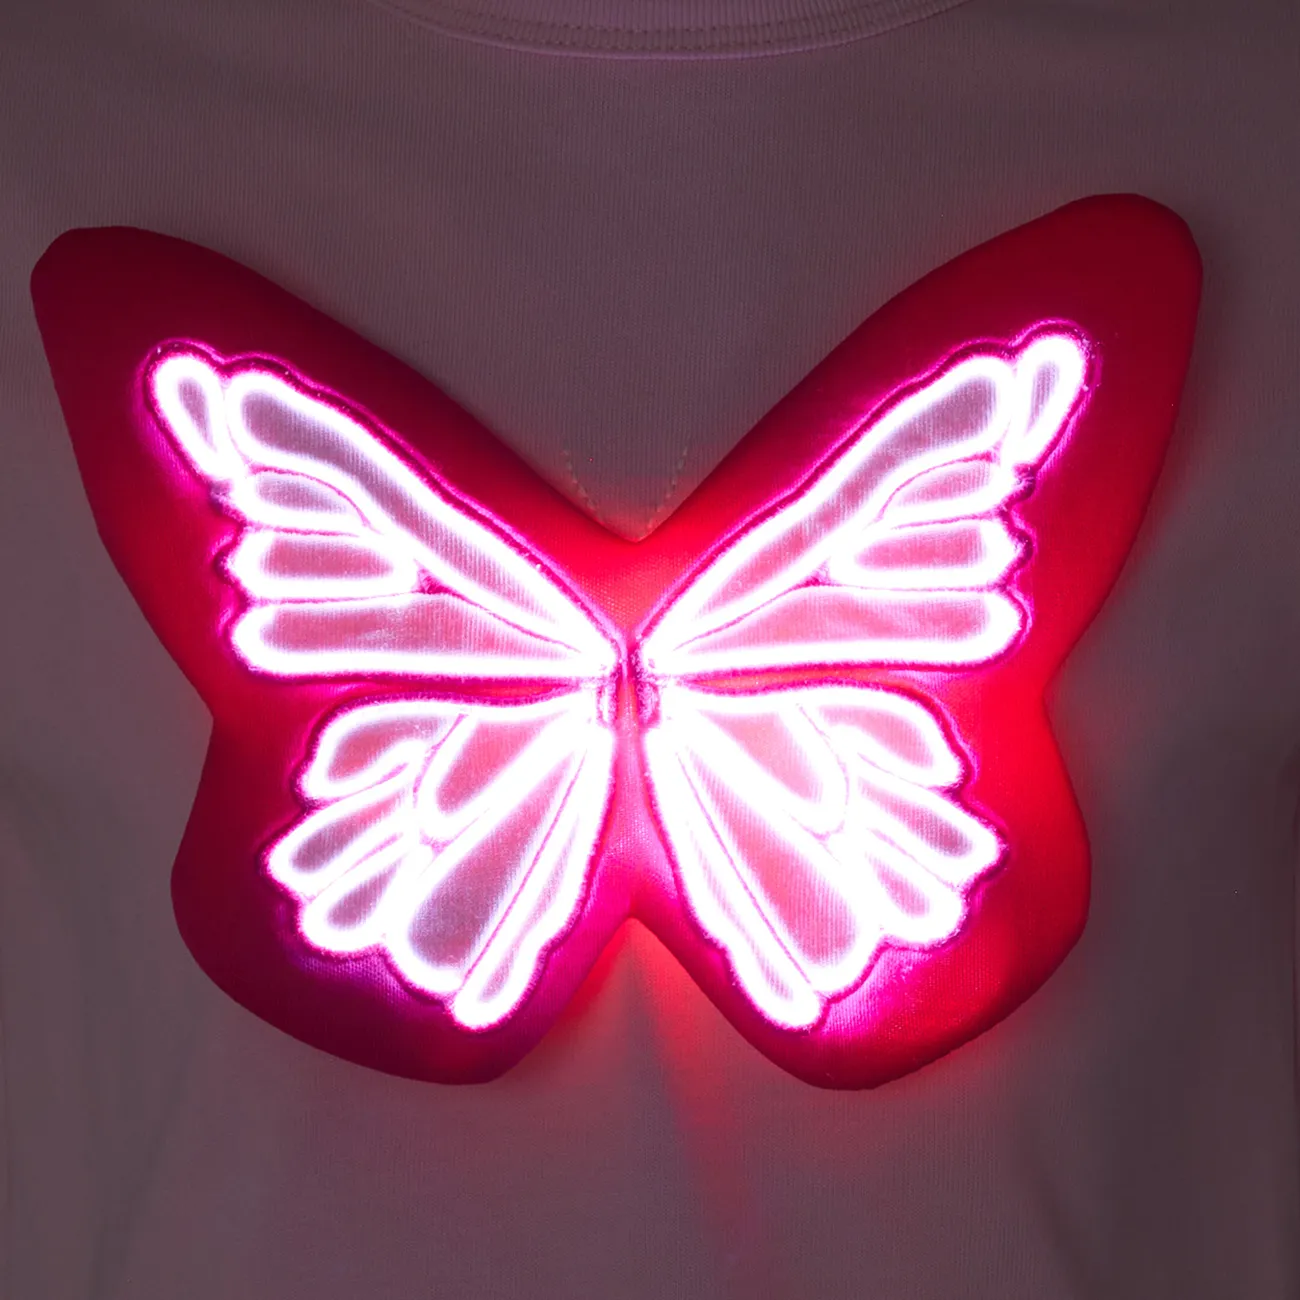 Go-Glow Illuminating T-shirt with Removable Light Up Butterfly Including Controller (Built-In Battery) Pink big image 1